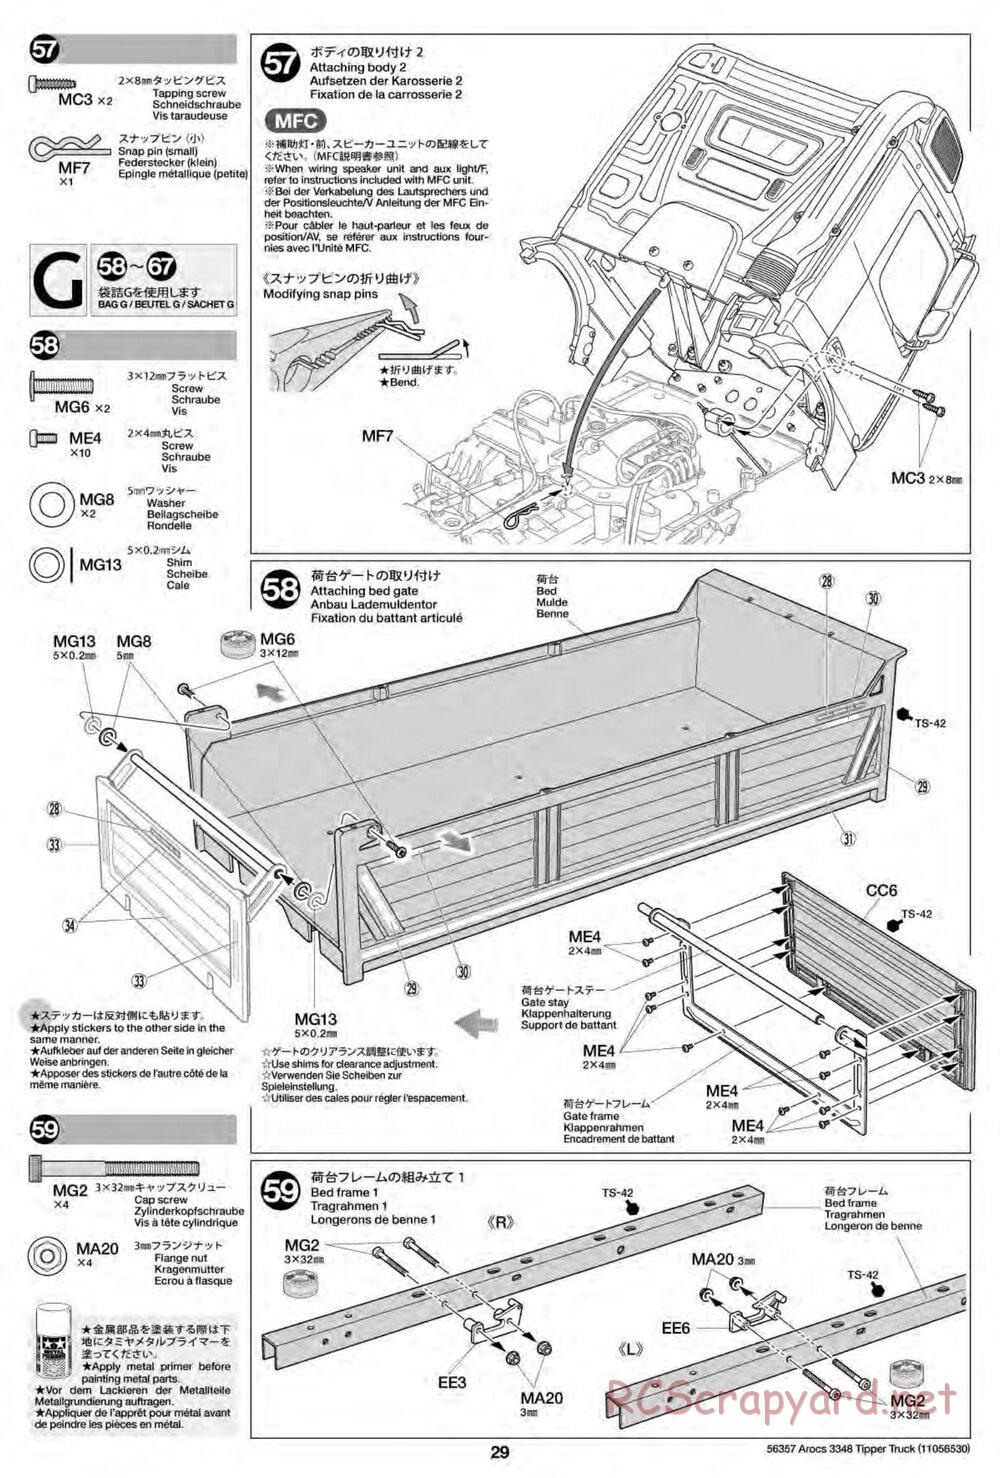 Tamiya - Mercedes-Benz Arocs 3348 6x4 Tipper Truck Chassis - Manual - Page 29